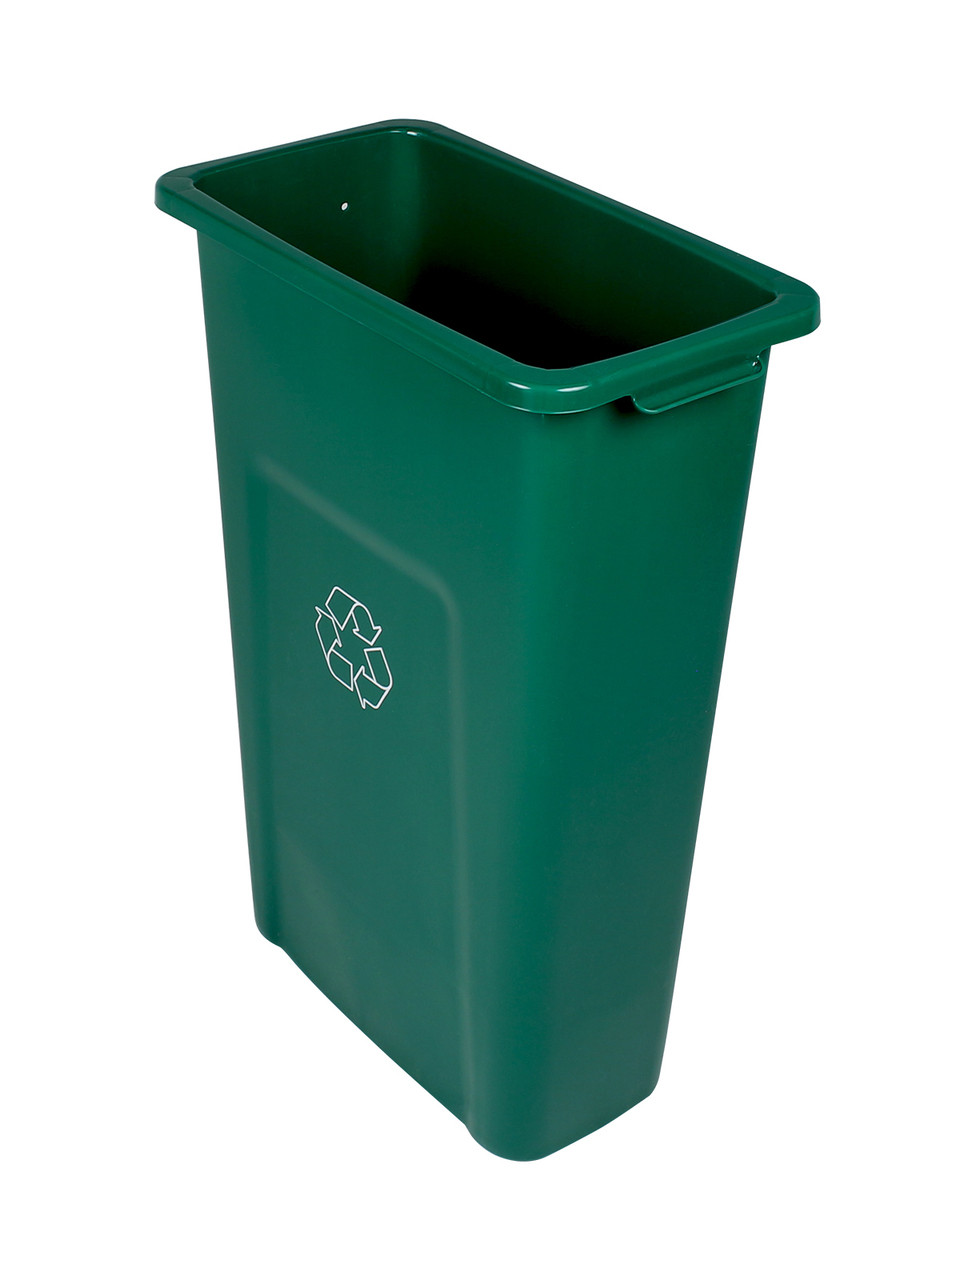 RW Clean Green Plastic Paper Recycling Trash Can Lid - Fits 23 gal